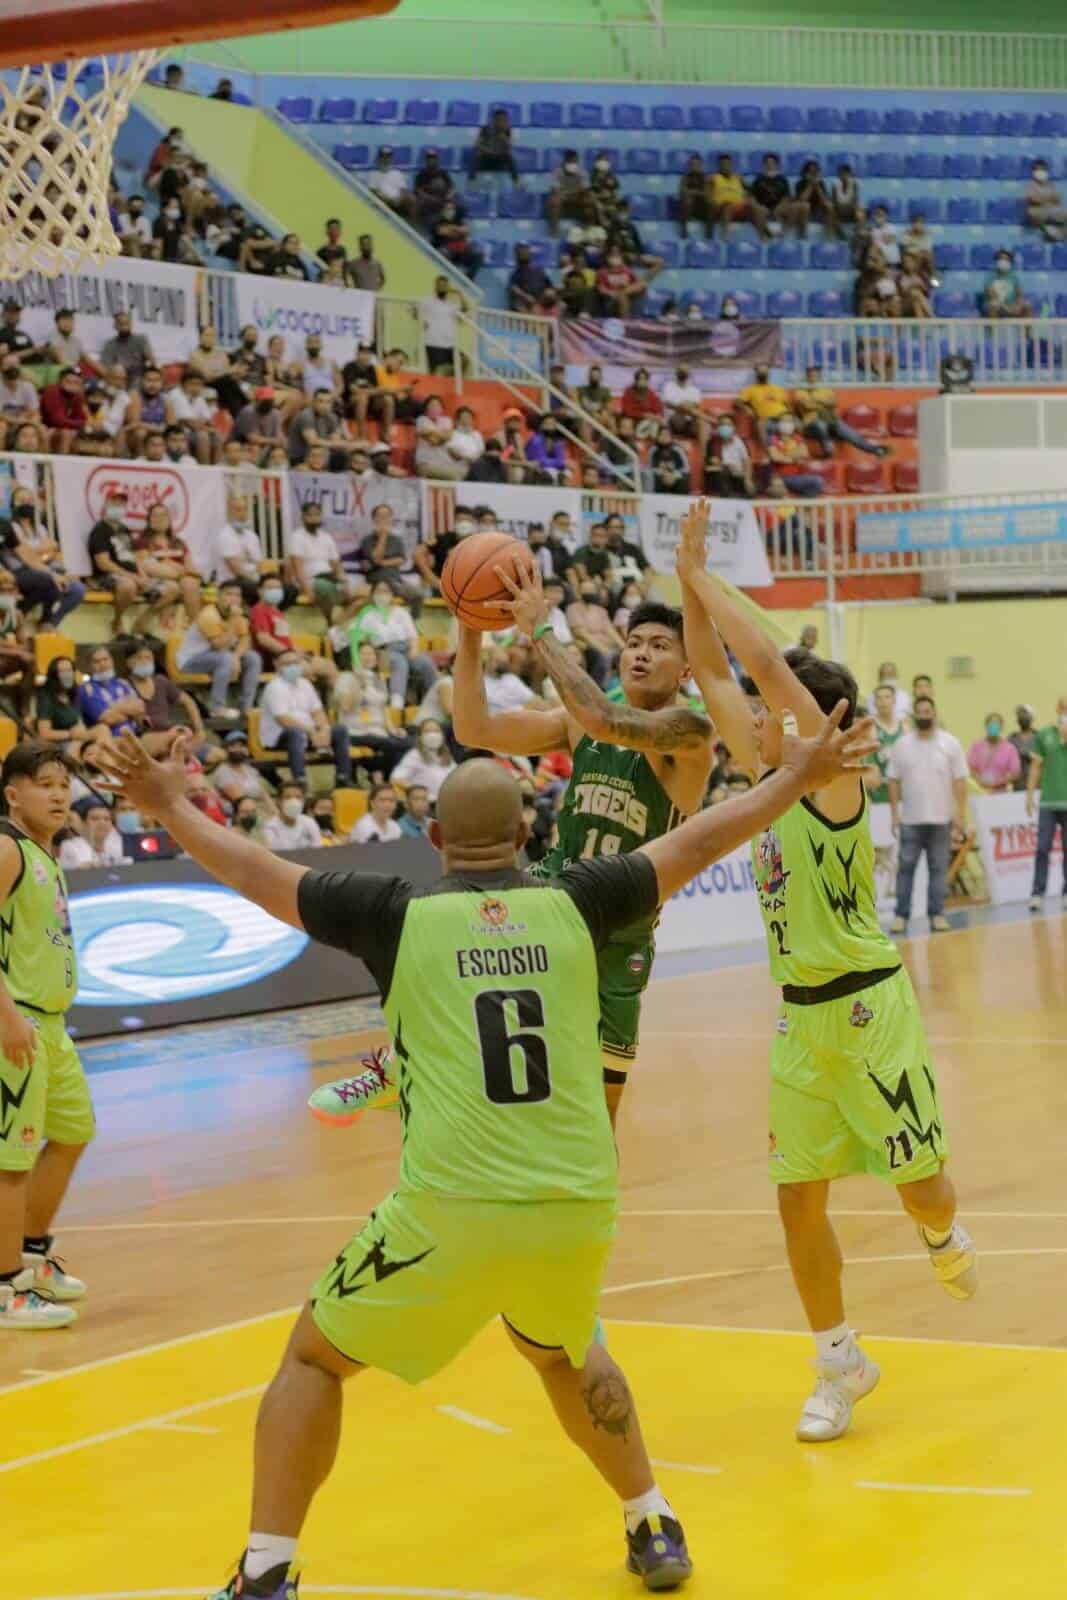 A group of men in green uniforms participates as Pilipinas Super League opens.